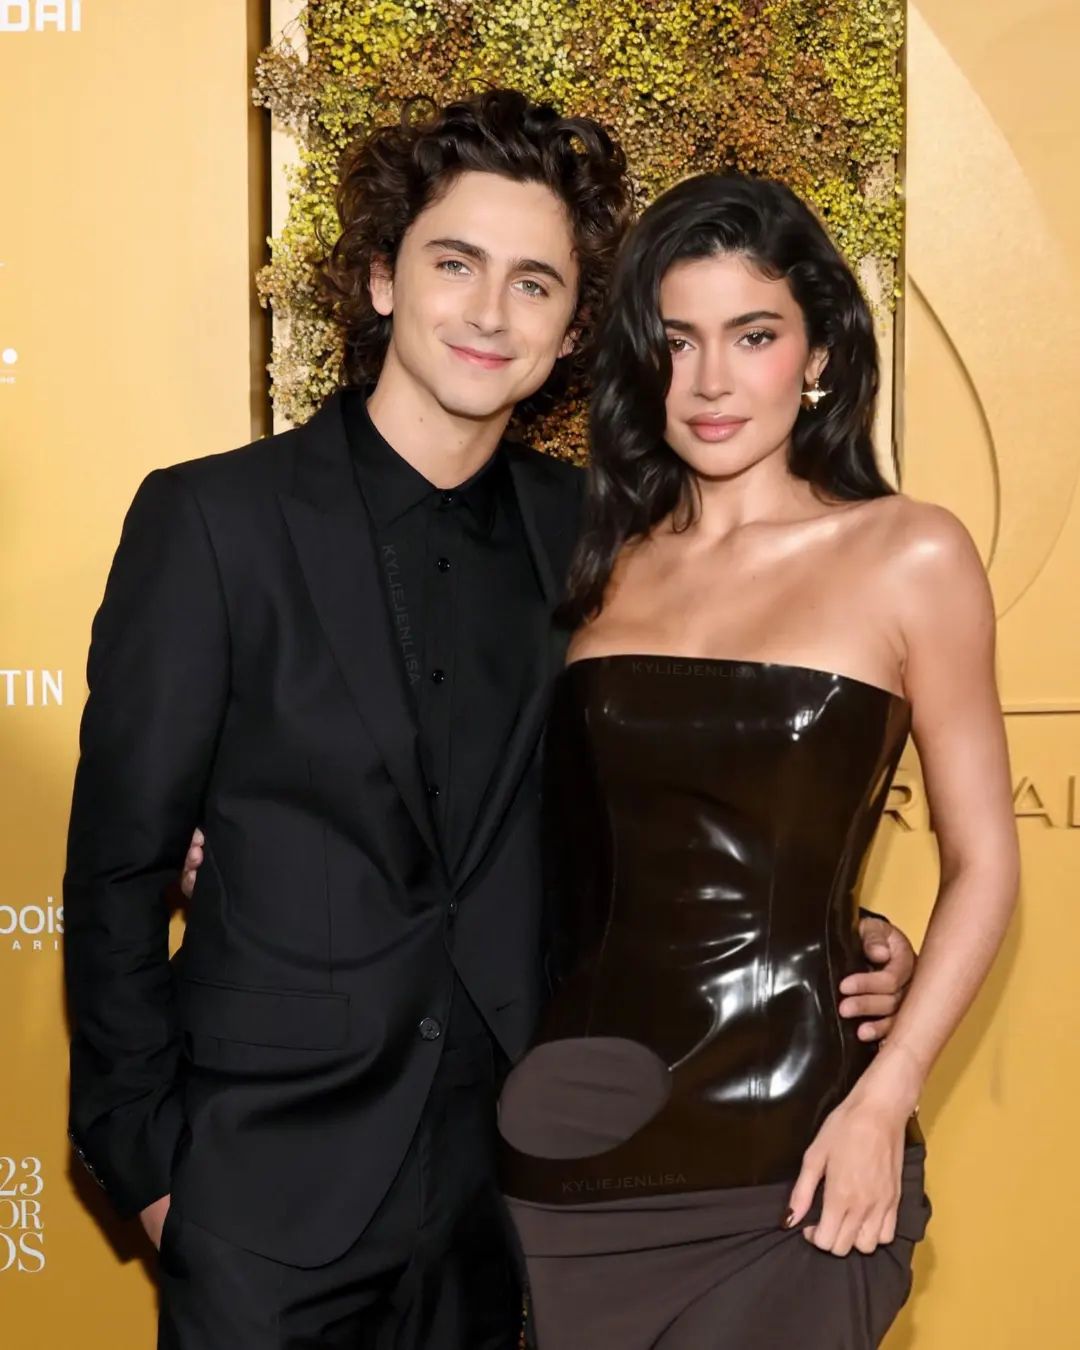 Kylie Jenner and Timothee Chamalet